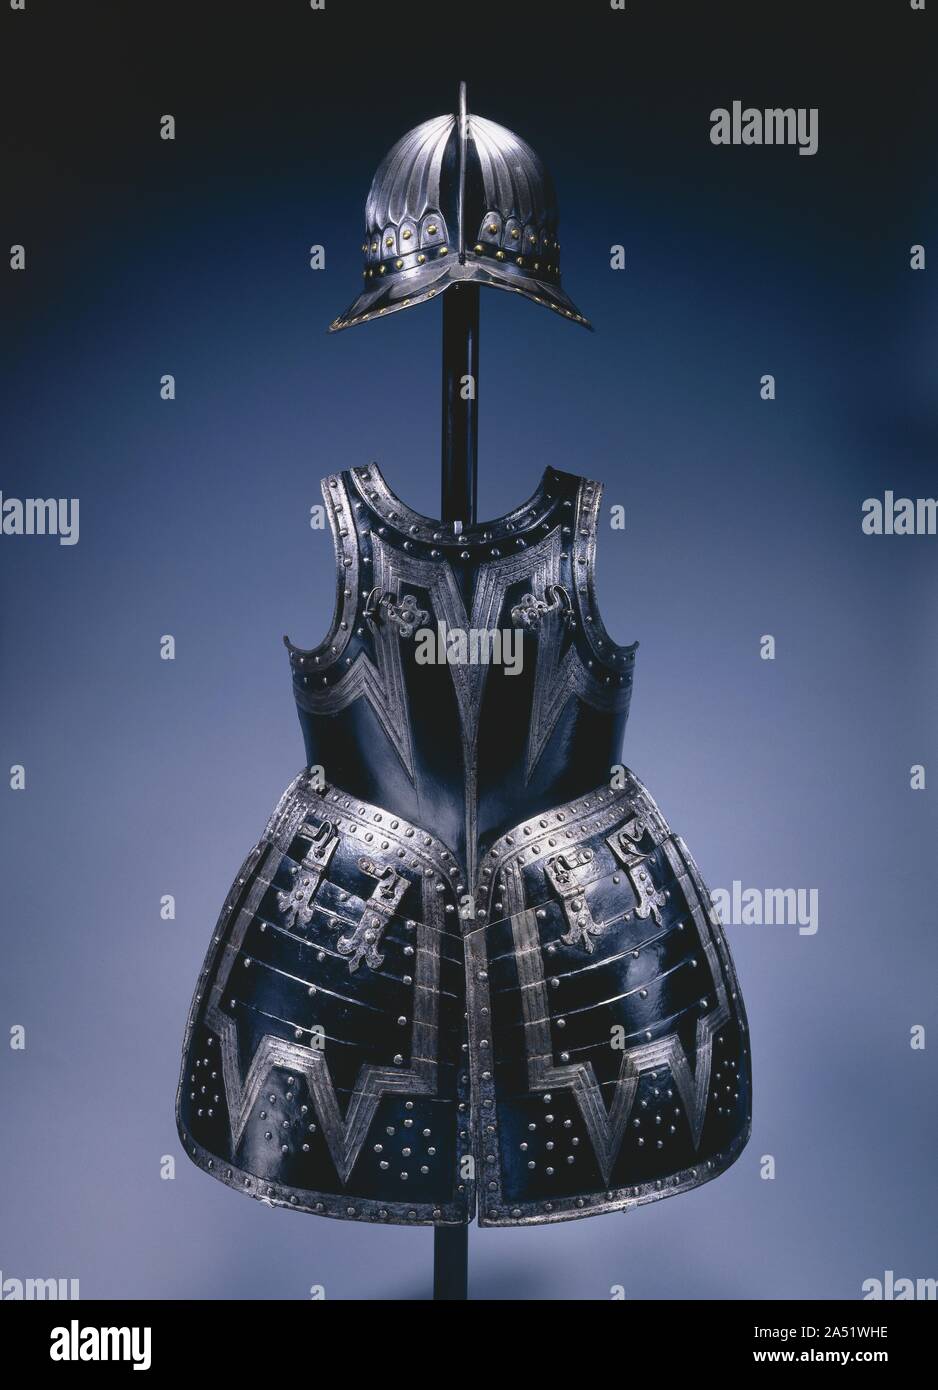 Pikeman&#x2019;s Armor, c. 1620-1630. Pikemen formed the backbone of infantry tactics through the end of the English Civil Wars (1642-51). Since muskets alone were ineffective against cavalry charges, companies of pikemen, armed with pikes, or spears, of 12 to 16 feet in length, were deployed in defensive formations to protect the musketeers, who wore no armor. A pikeman was usually equipped with a breastplate and backplate, hinged tassets reaching to mid-thigh, and sometimes a gorget, or neck piece, worn over a heavy buffcoat. High boots replaced leg armor. A brimmed, high-combed helmet known Stock Photo